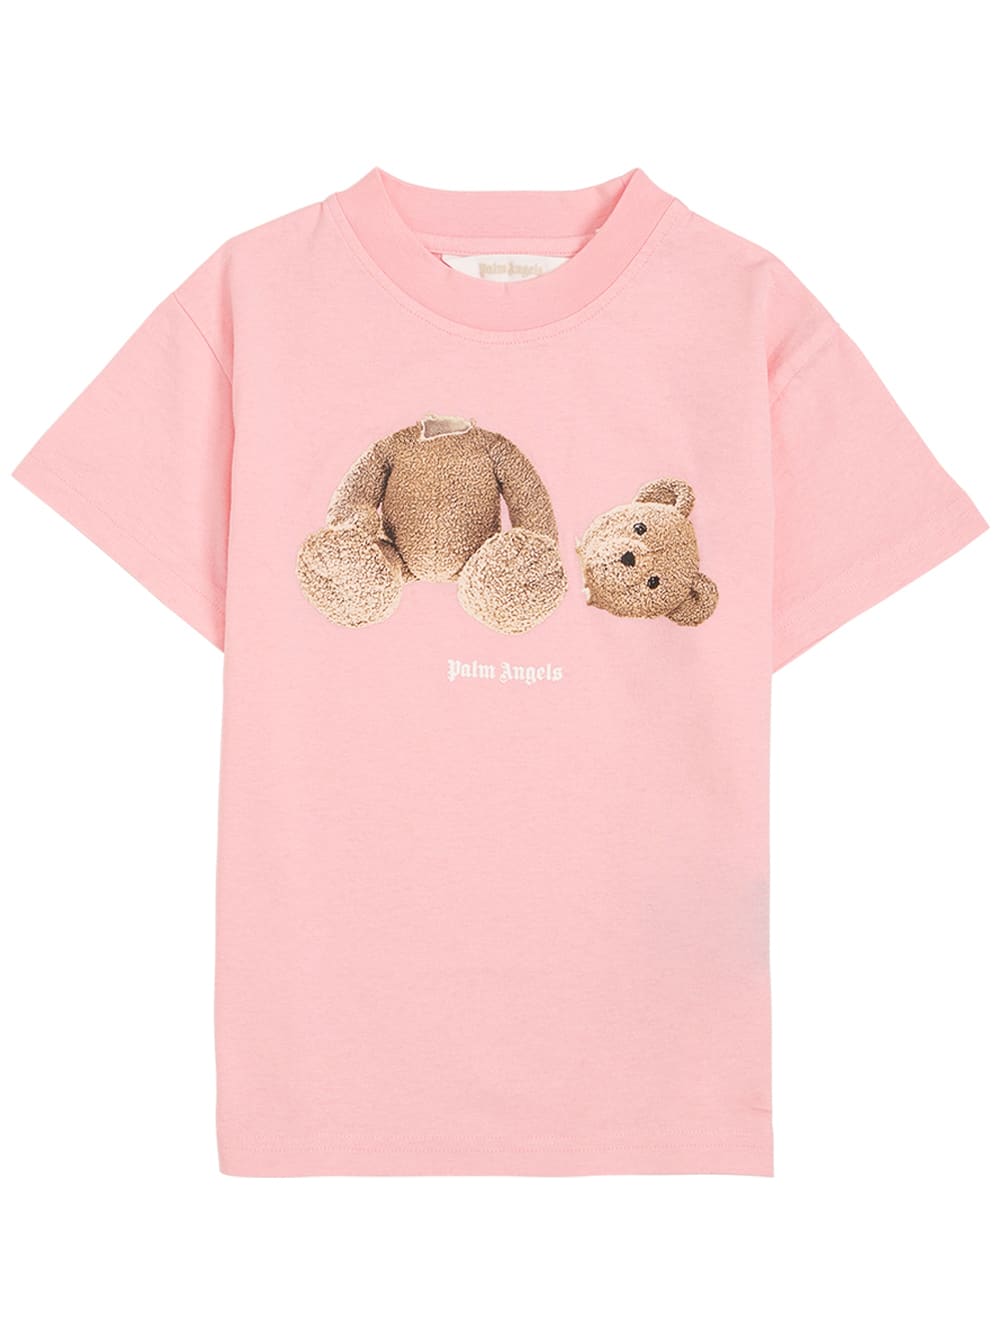 Palm Angels Pink Cotton T-shirt With Teddy Bear Print